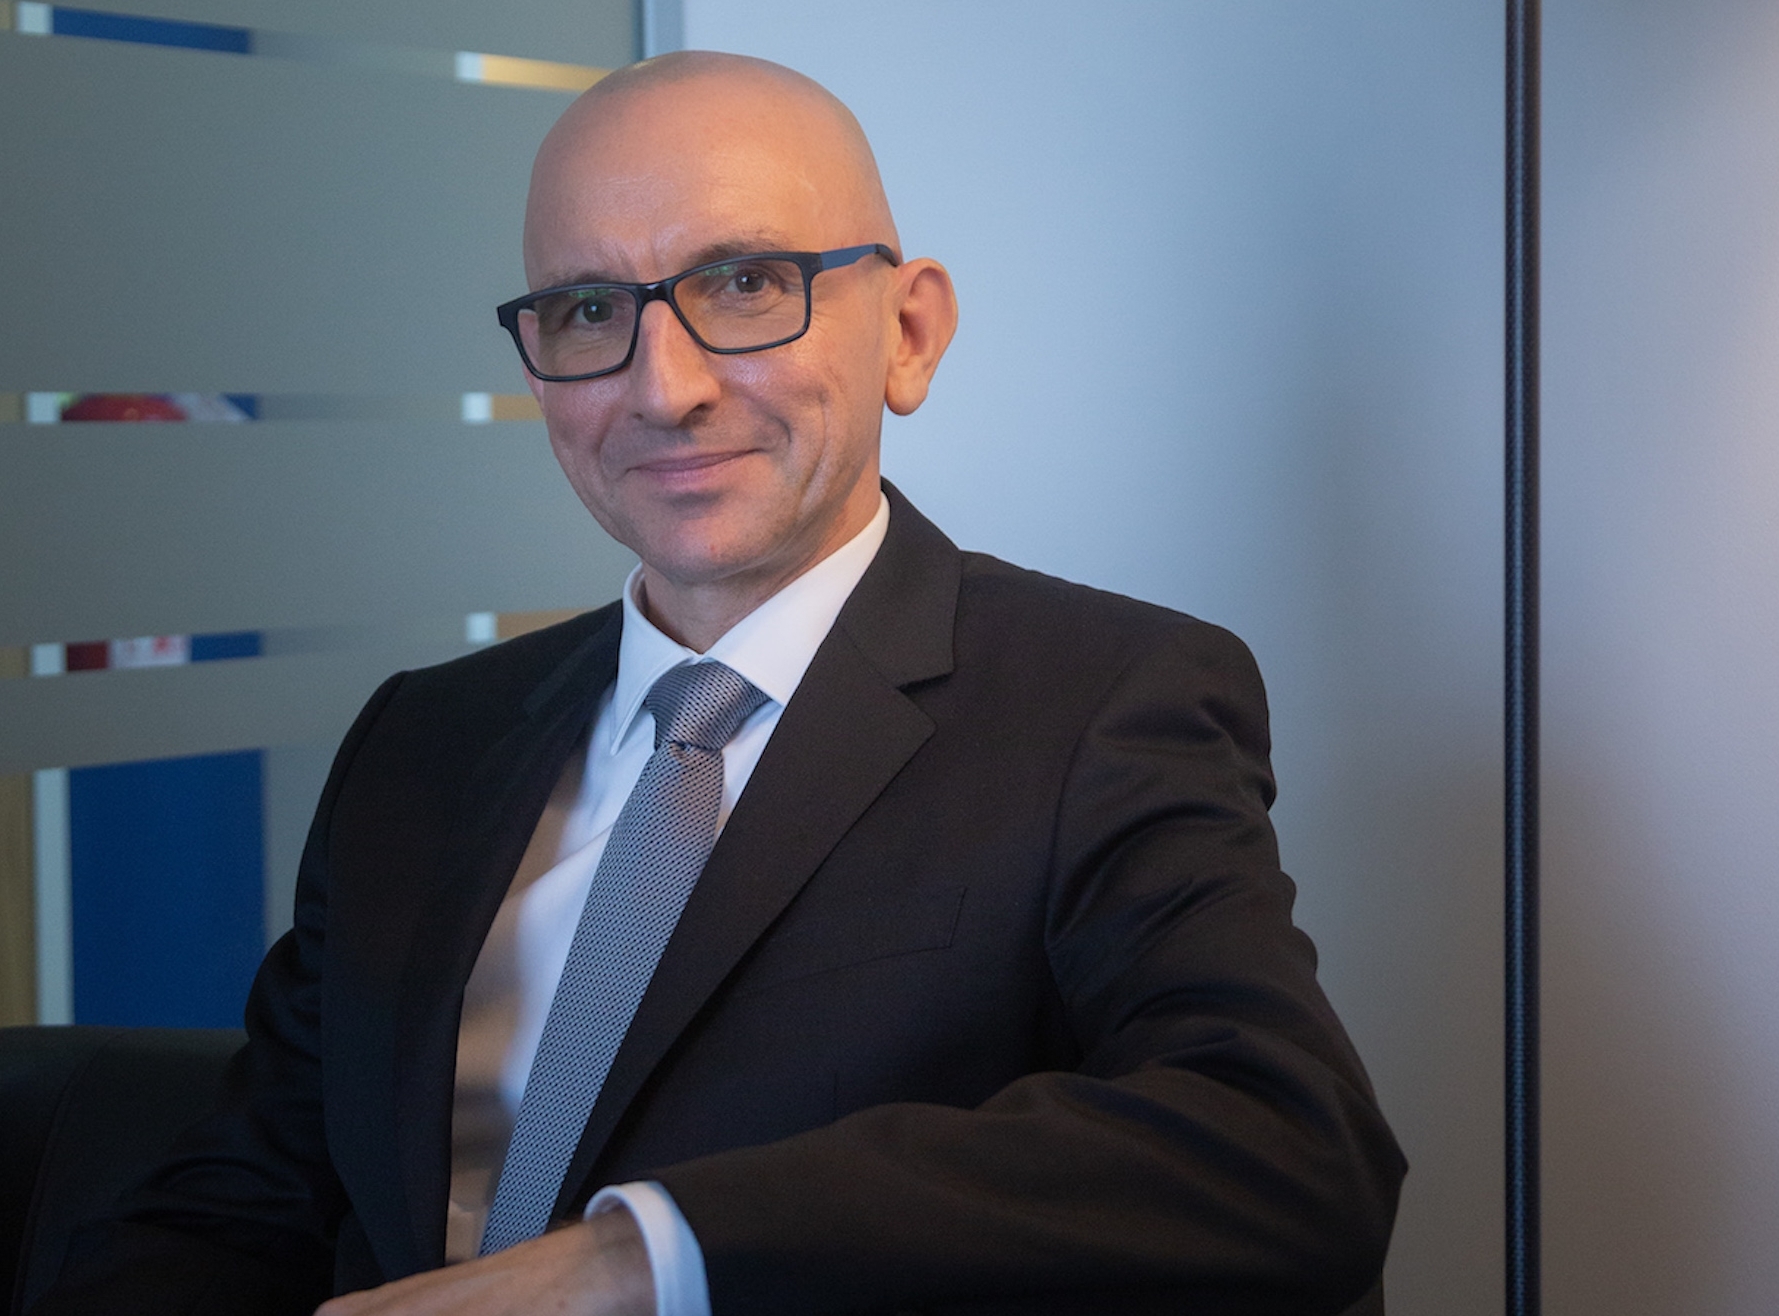 Adriatic LNG gets new managing director